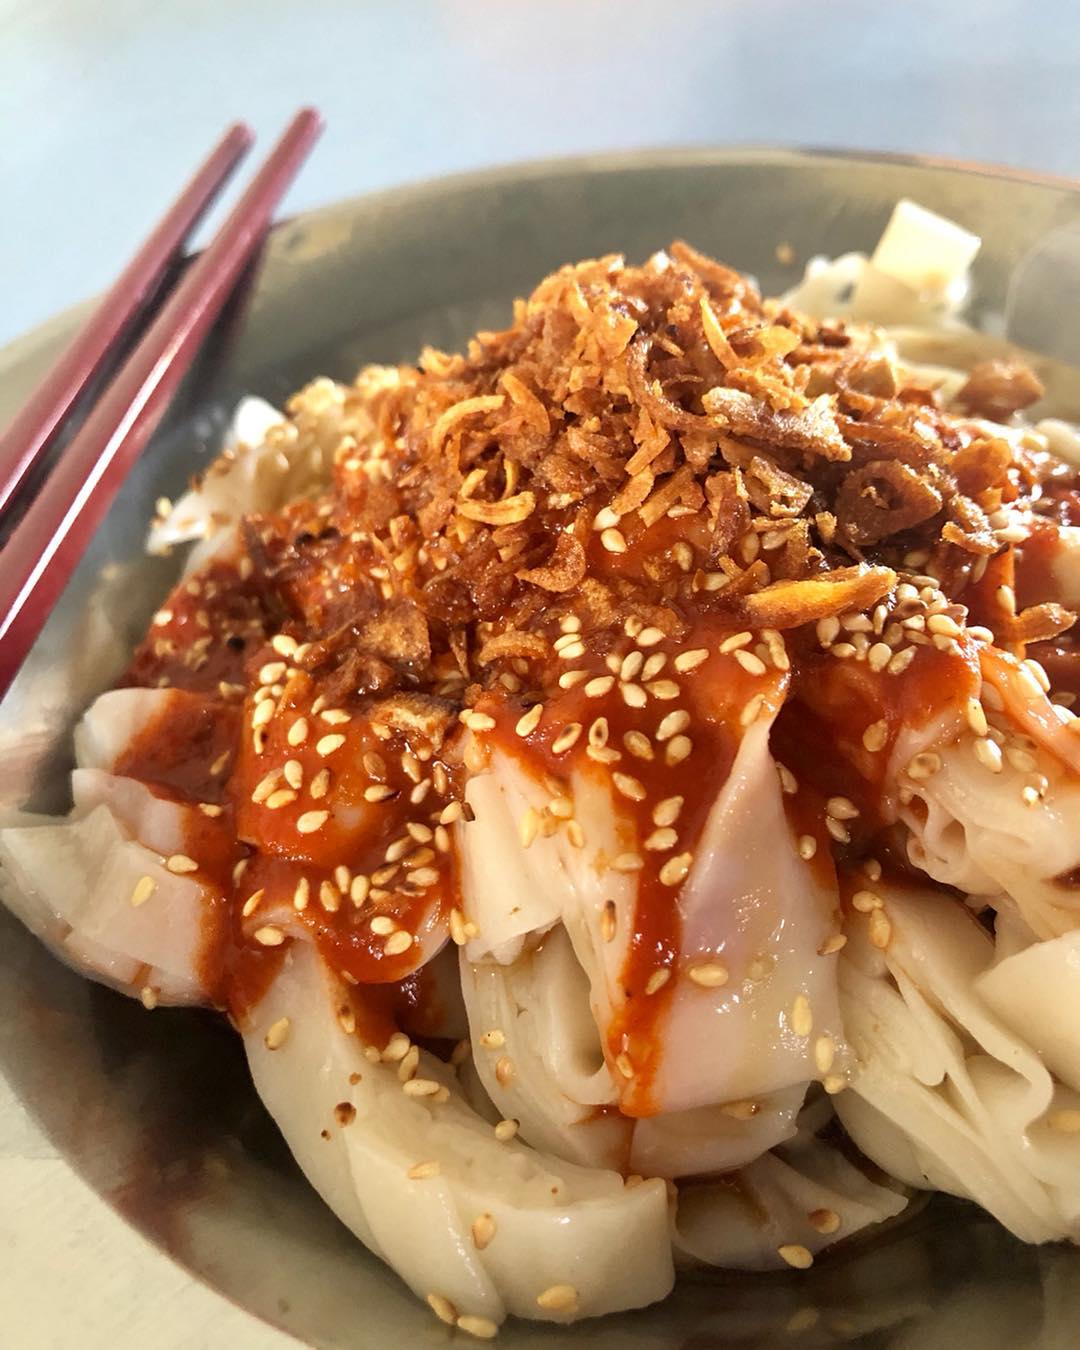 Chee cheong fun at Canning Garden, Ipoh